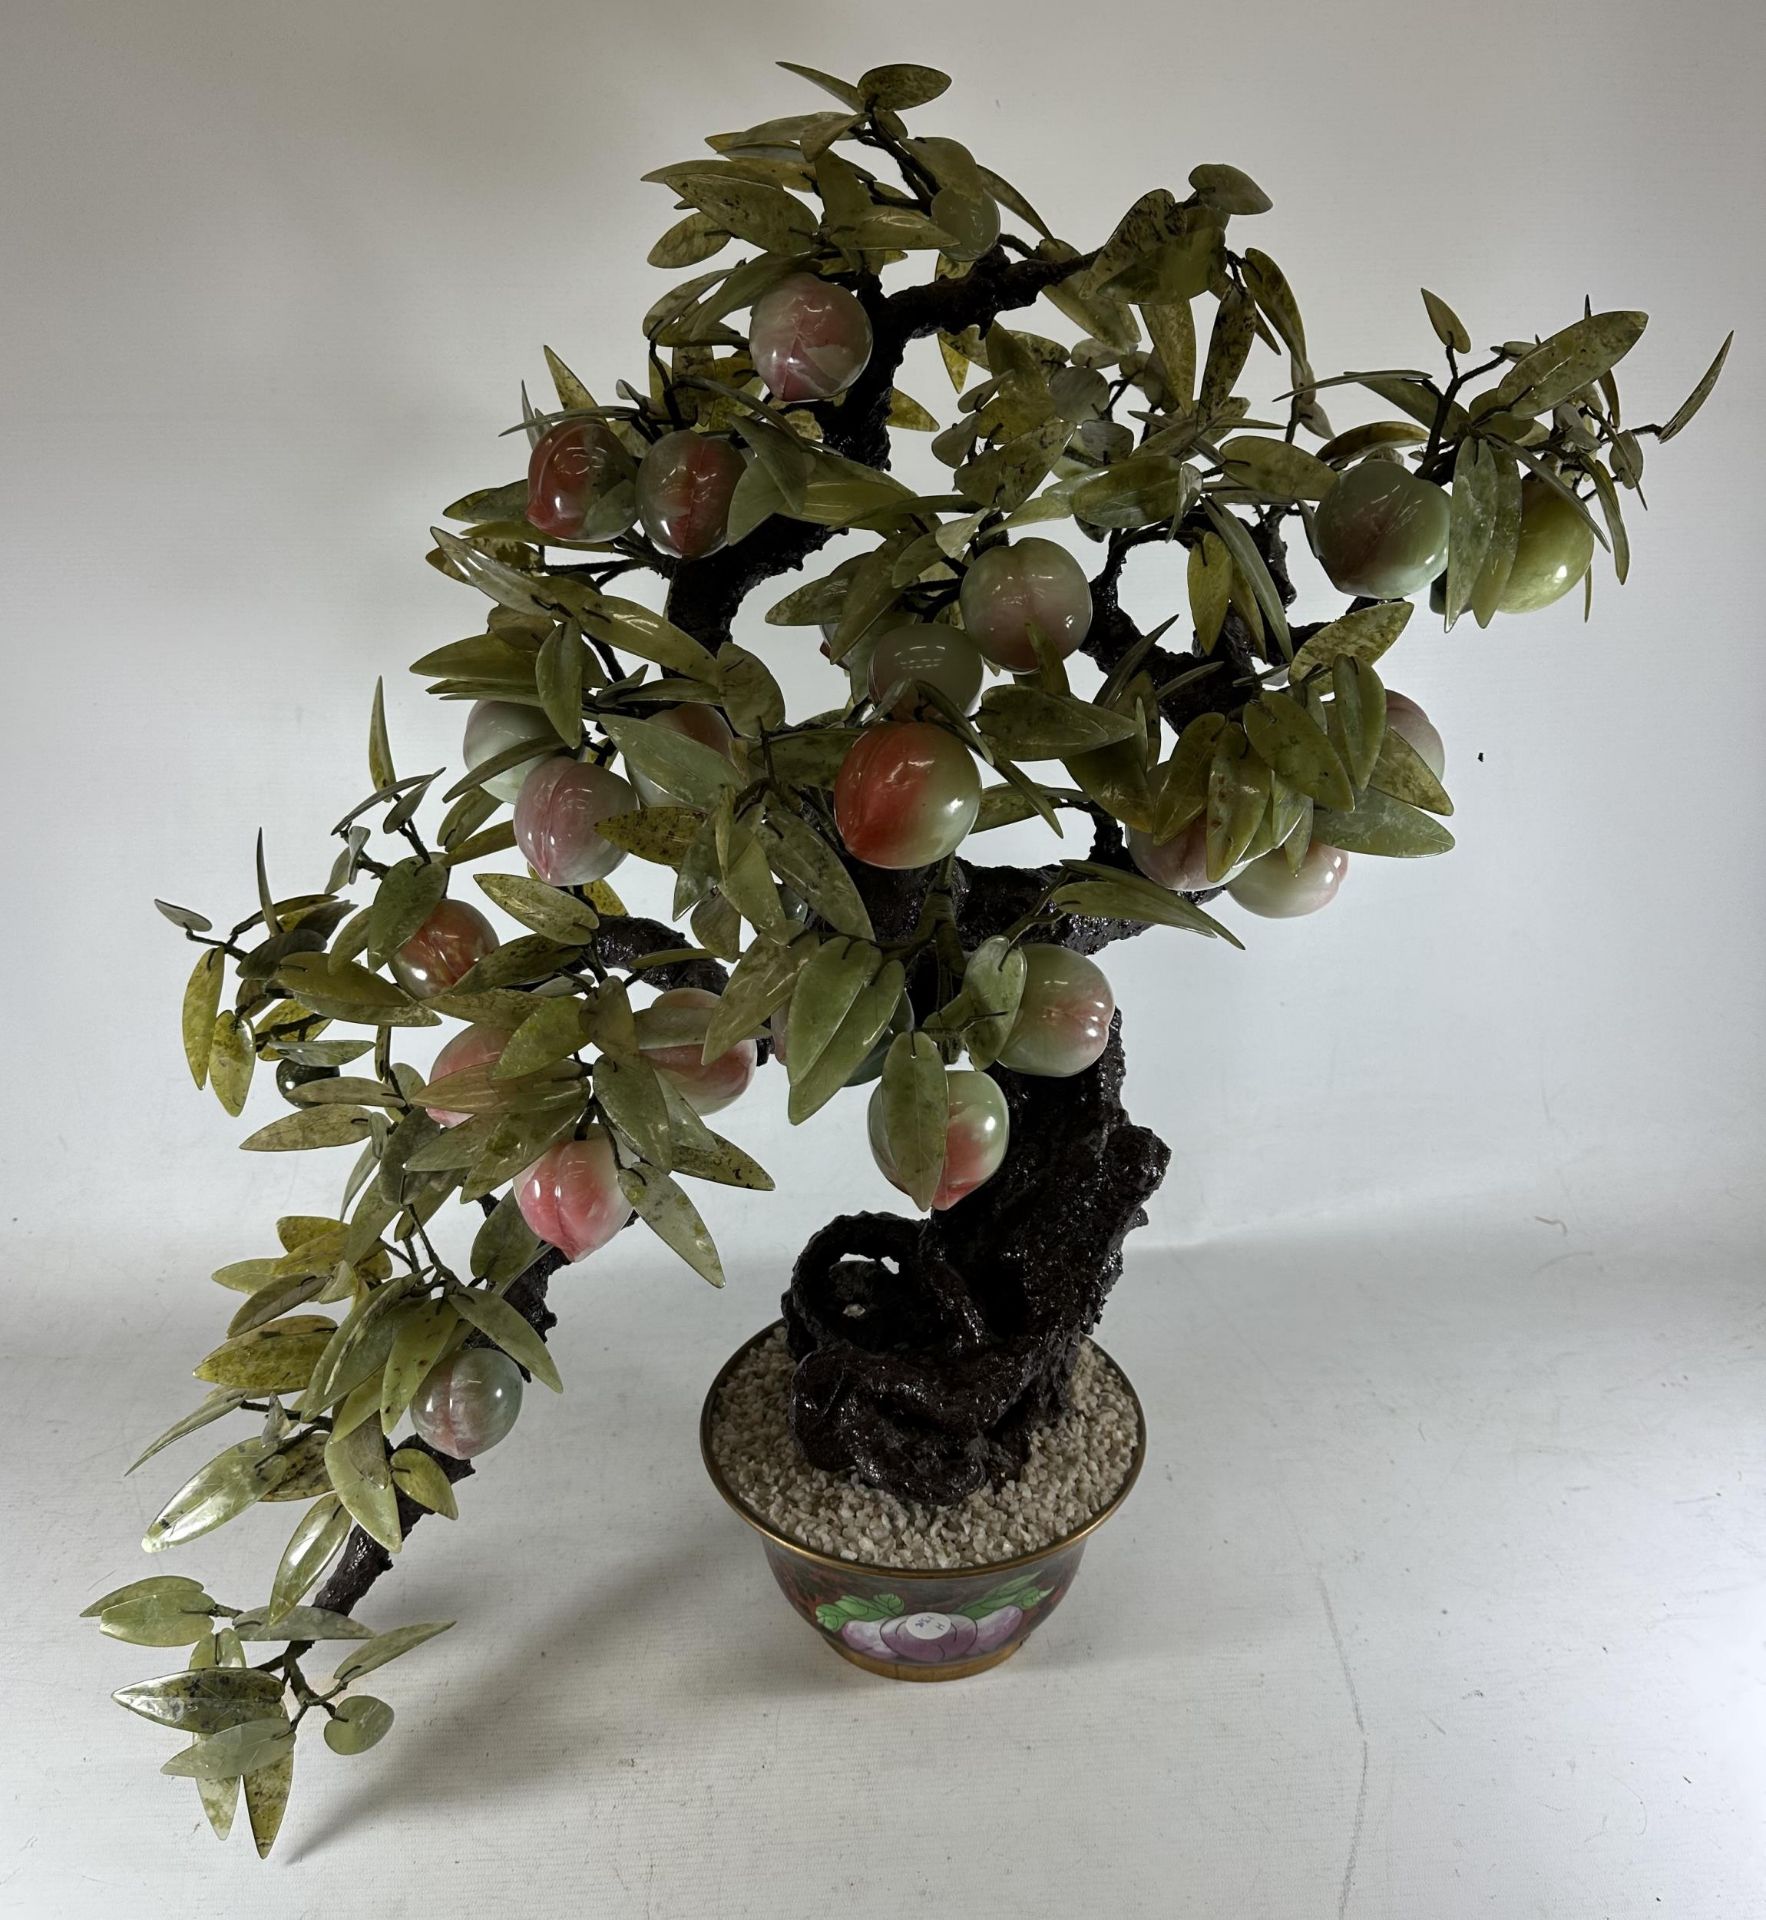 A LARGE AND IMPRESSIVE ORIENTAL MODEL OF A BONSAI TREE WITH GREEN GLASS LEAVES AND PINK FRUIT